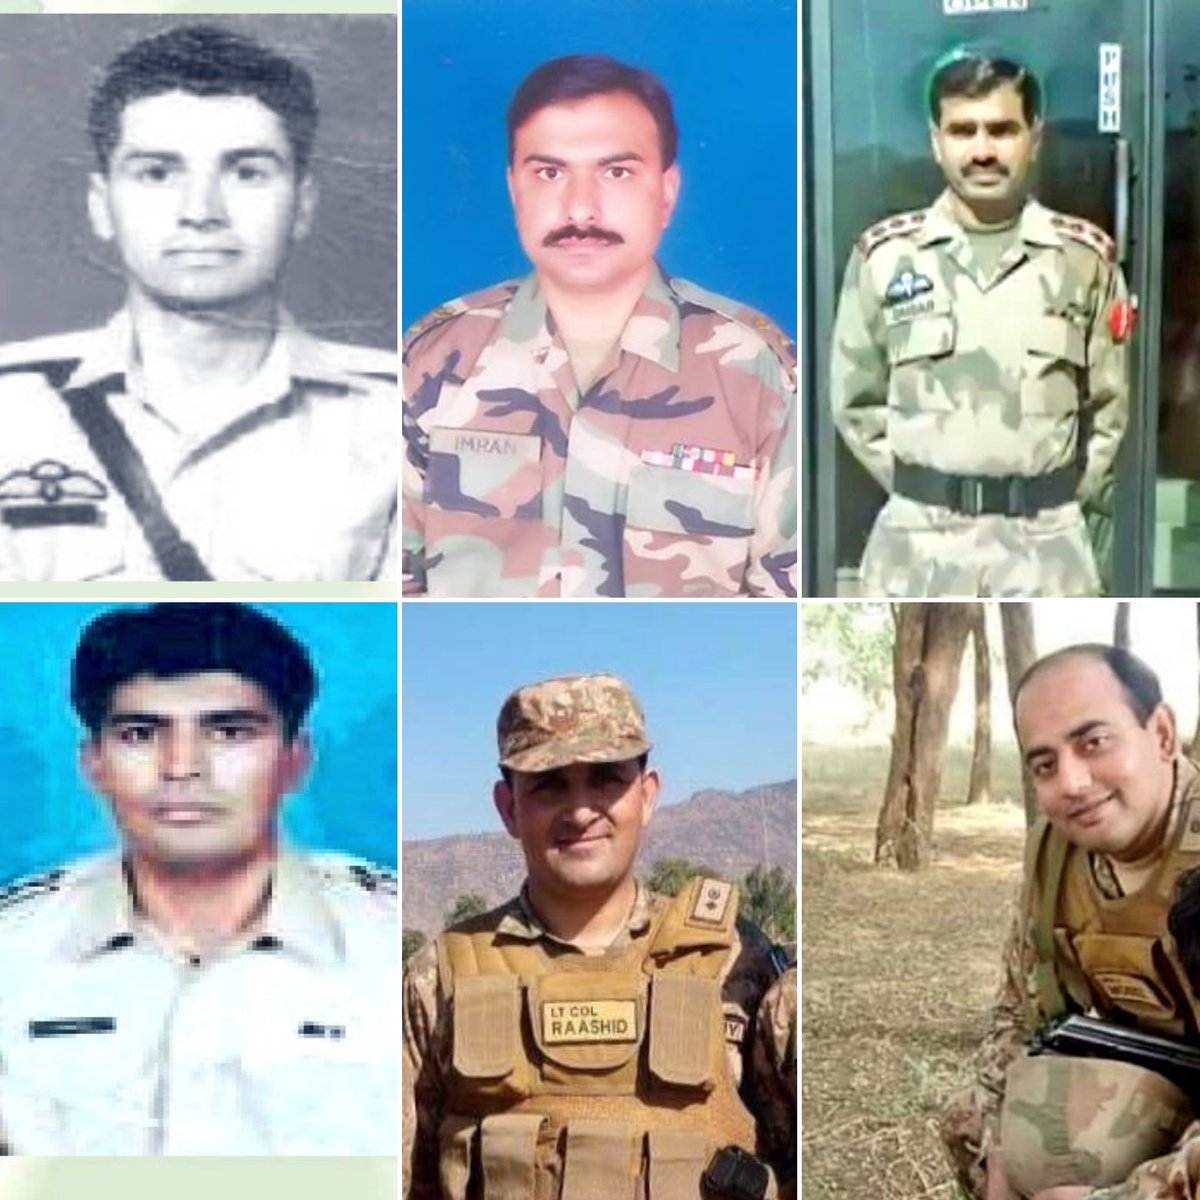 The unsung heroes who martyred in Waziristan while fighting against terrorists. We owe this peace to them.